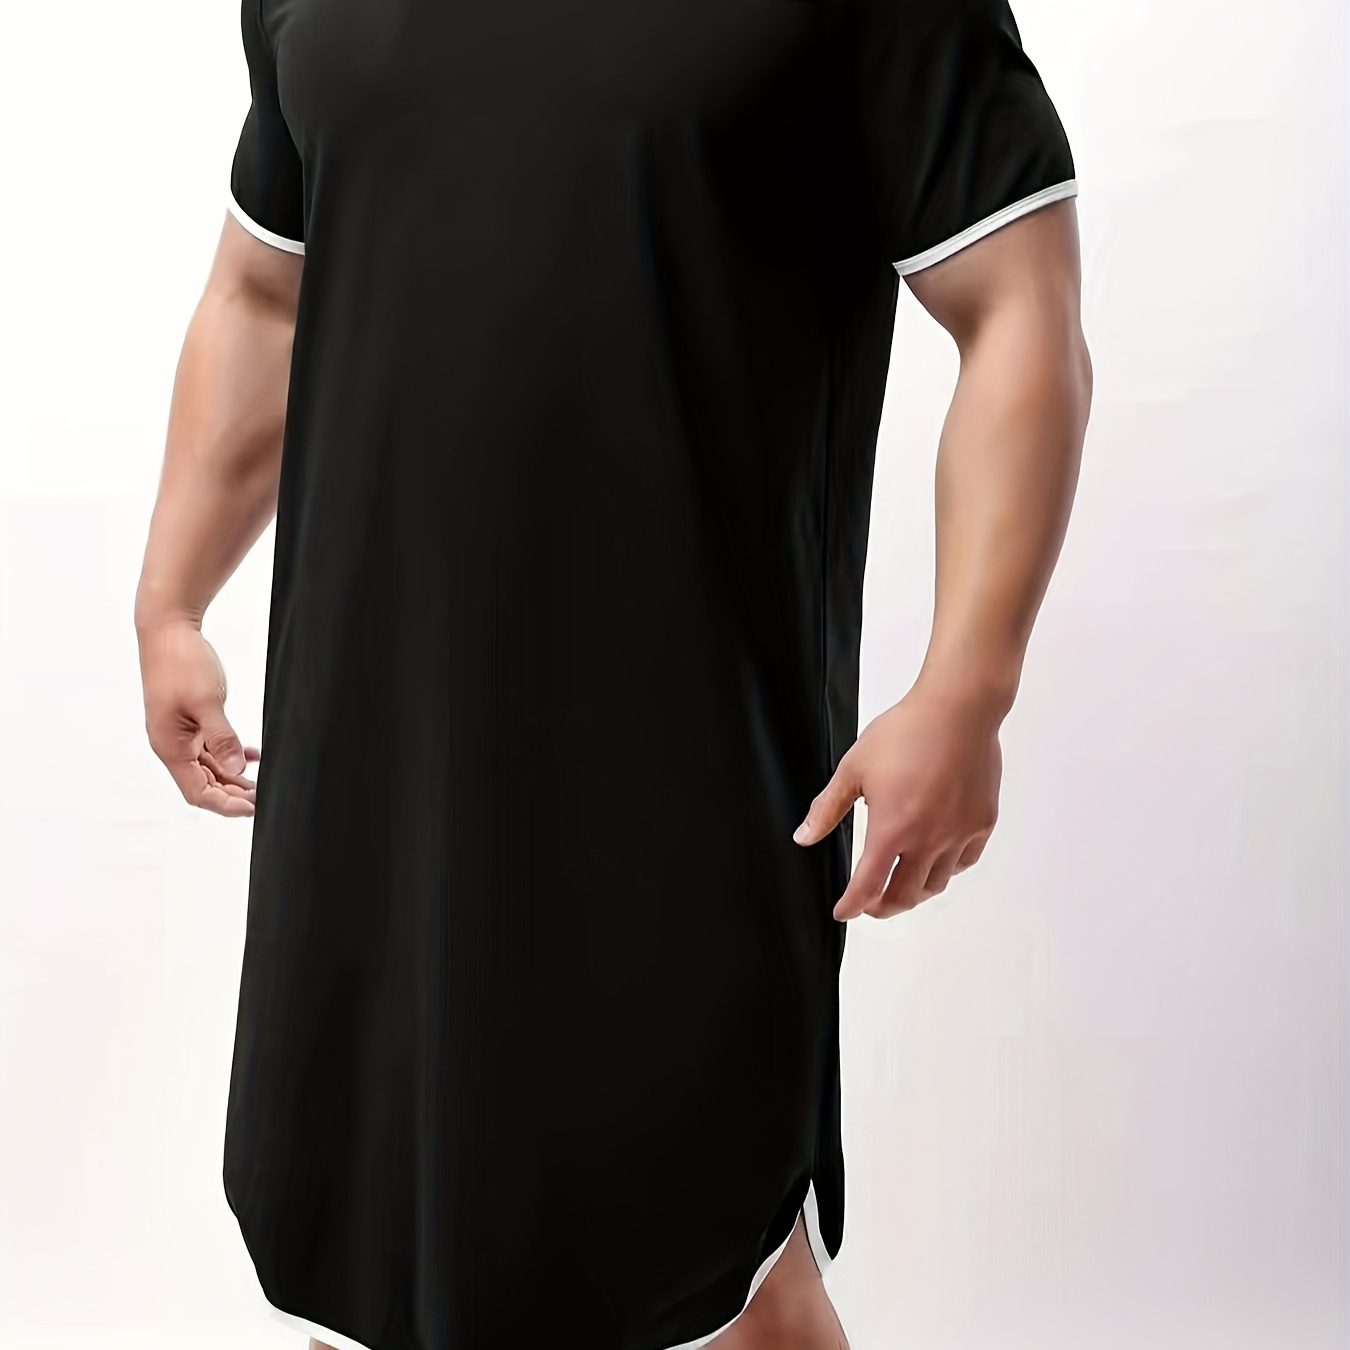 

Men's Trendy Pajamas Solid Night Dress, Crew Neck Short-sleeve Casual Comfy Breathable Nightgown Lounge Wear